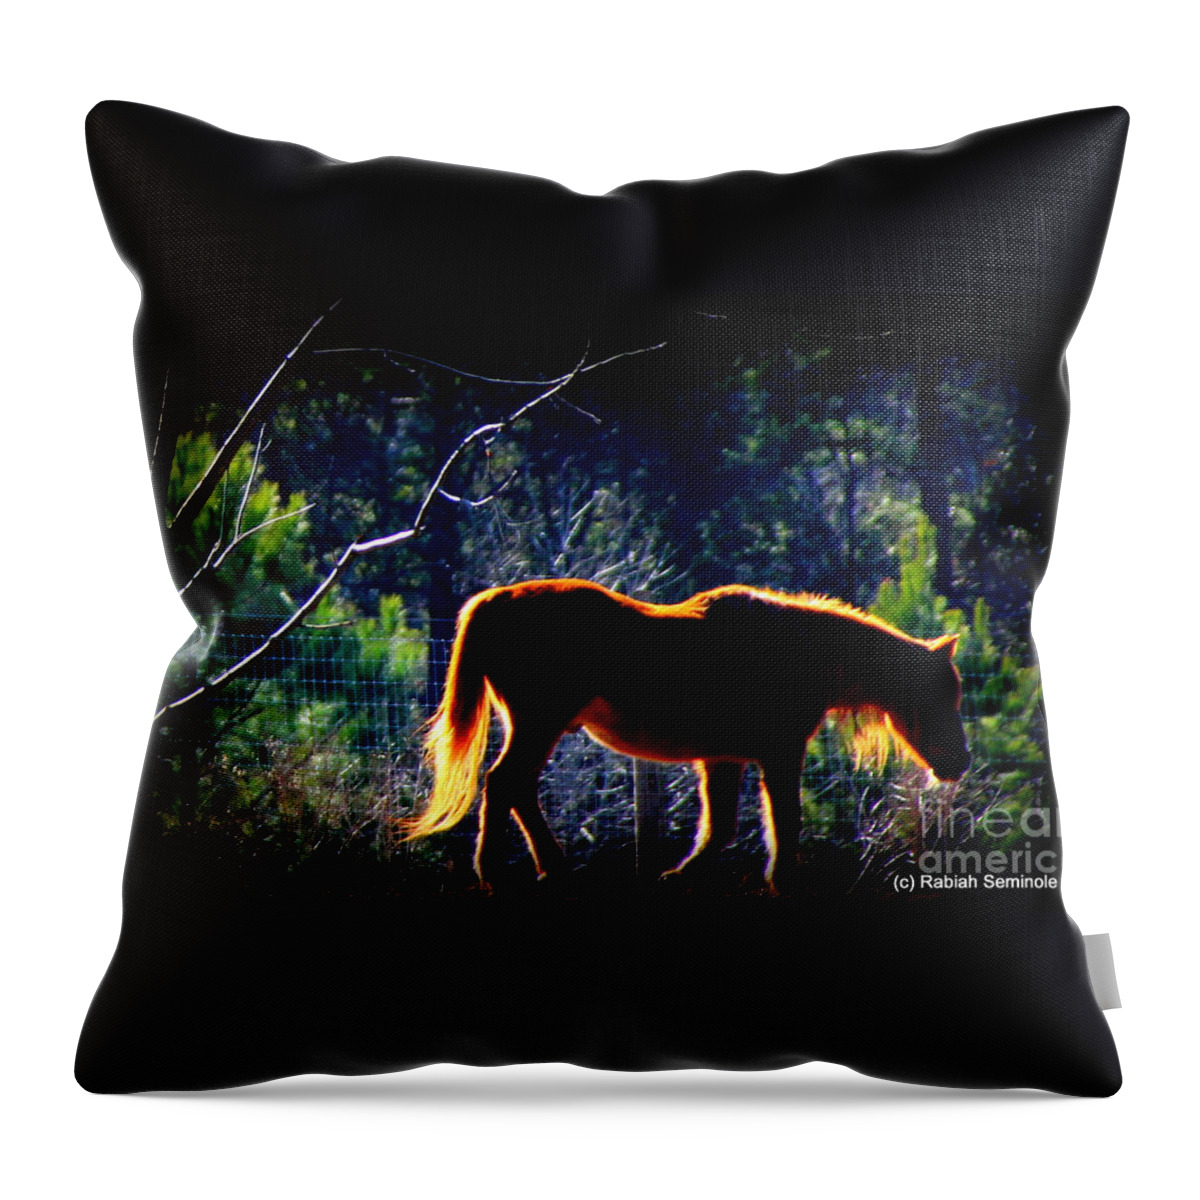 Horses Throw Pillow featuring the photograph Zuni In The Sunlight by Rabiah Seminole